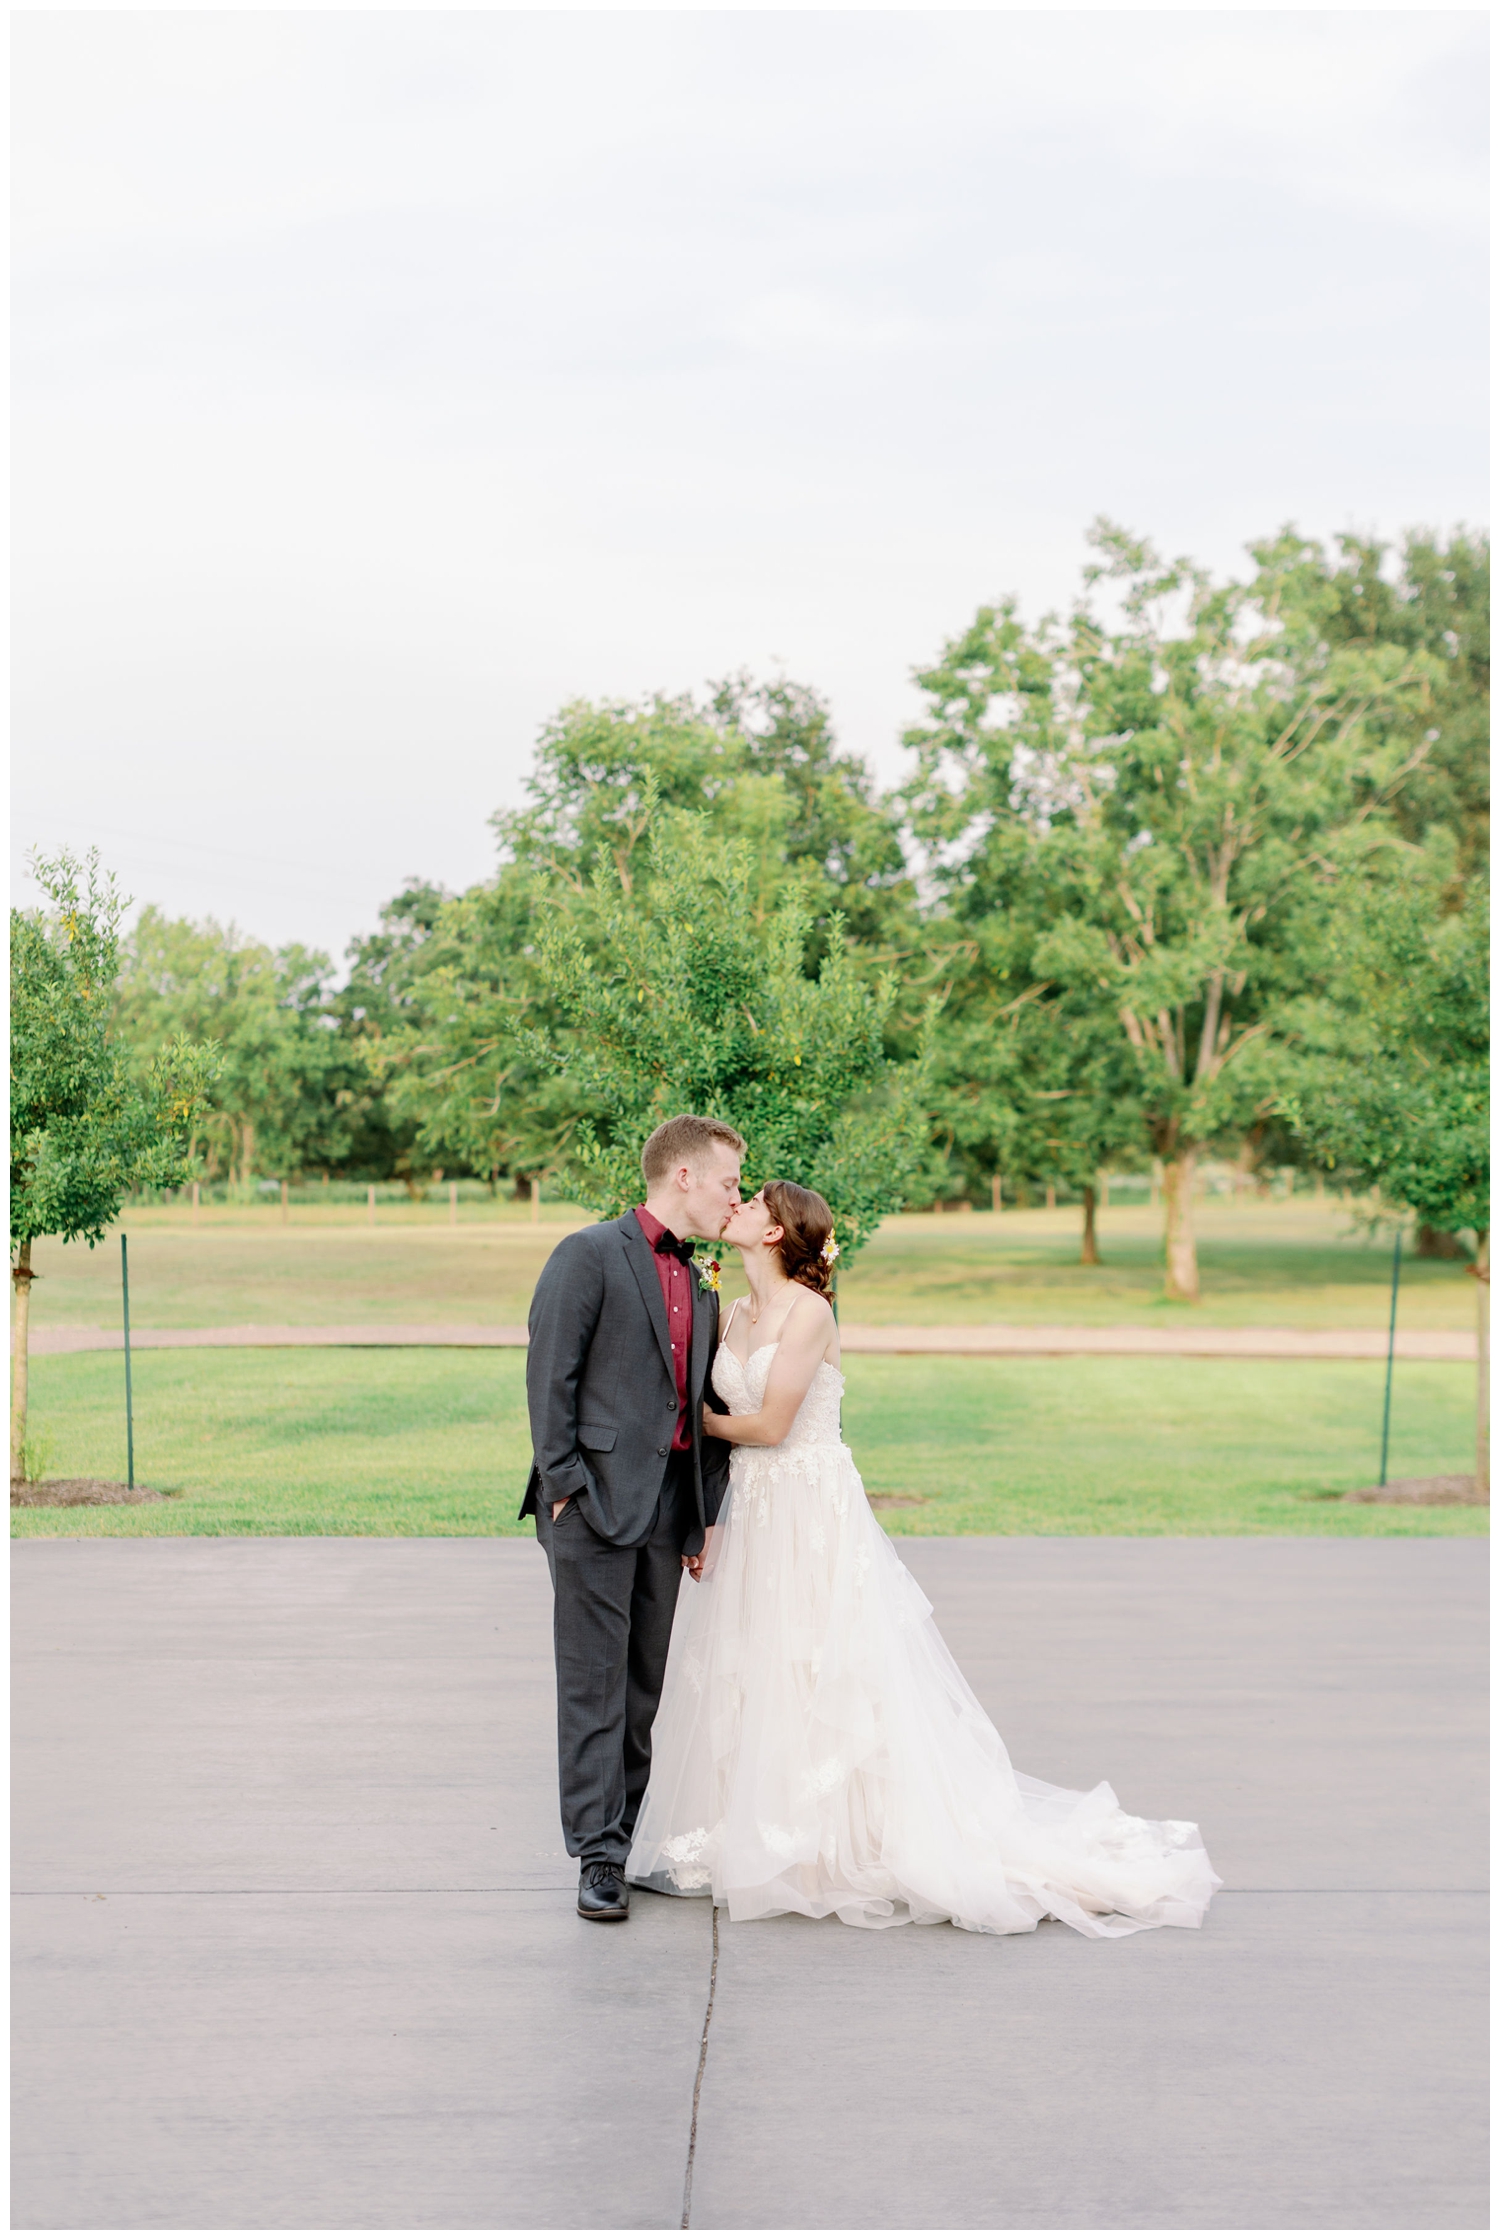 The Oaks at the Oak Plantation wedding with bride and groom portrait